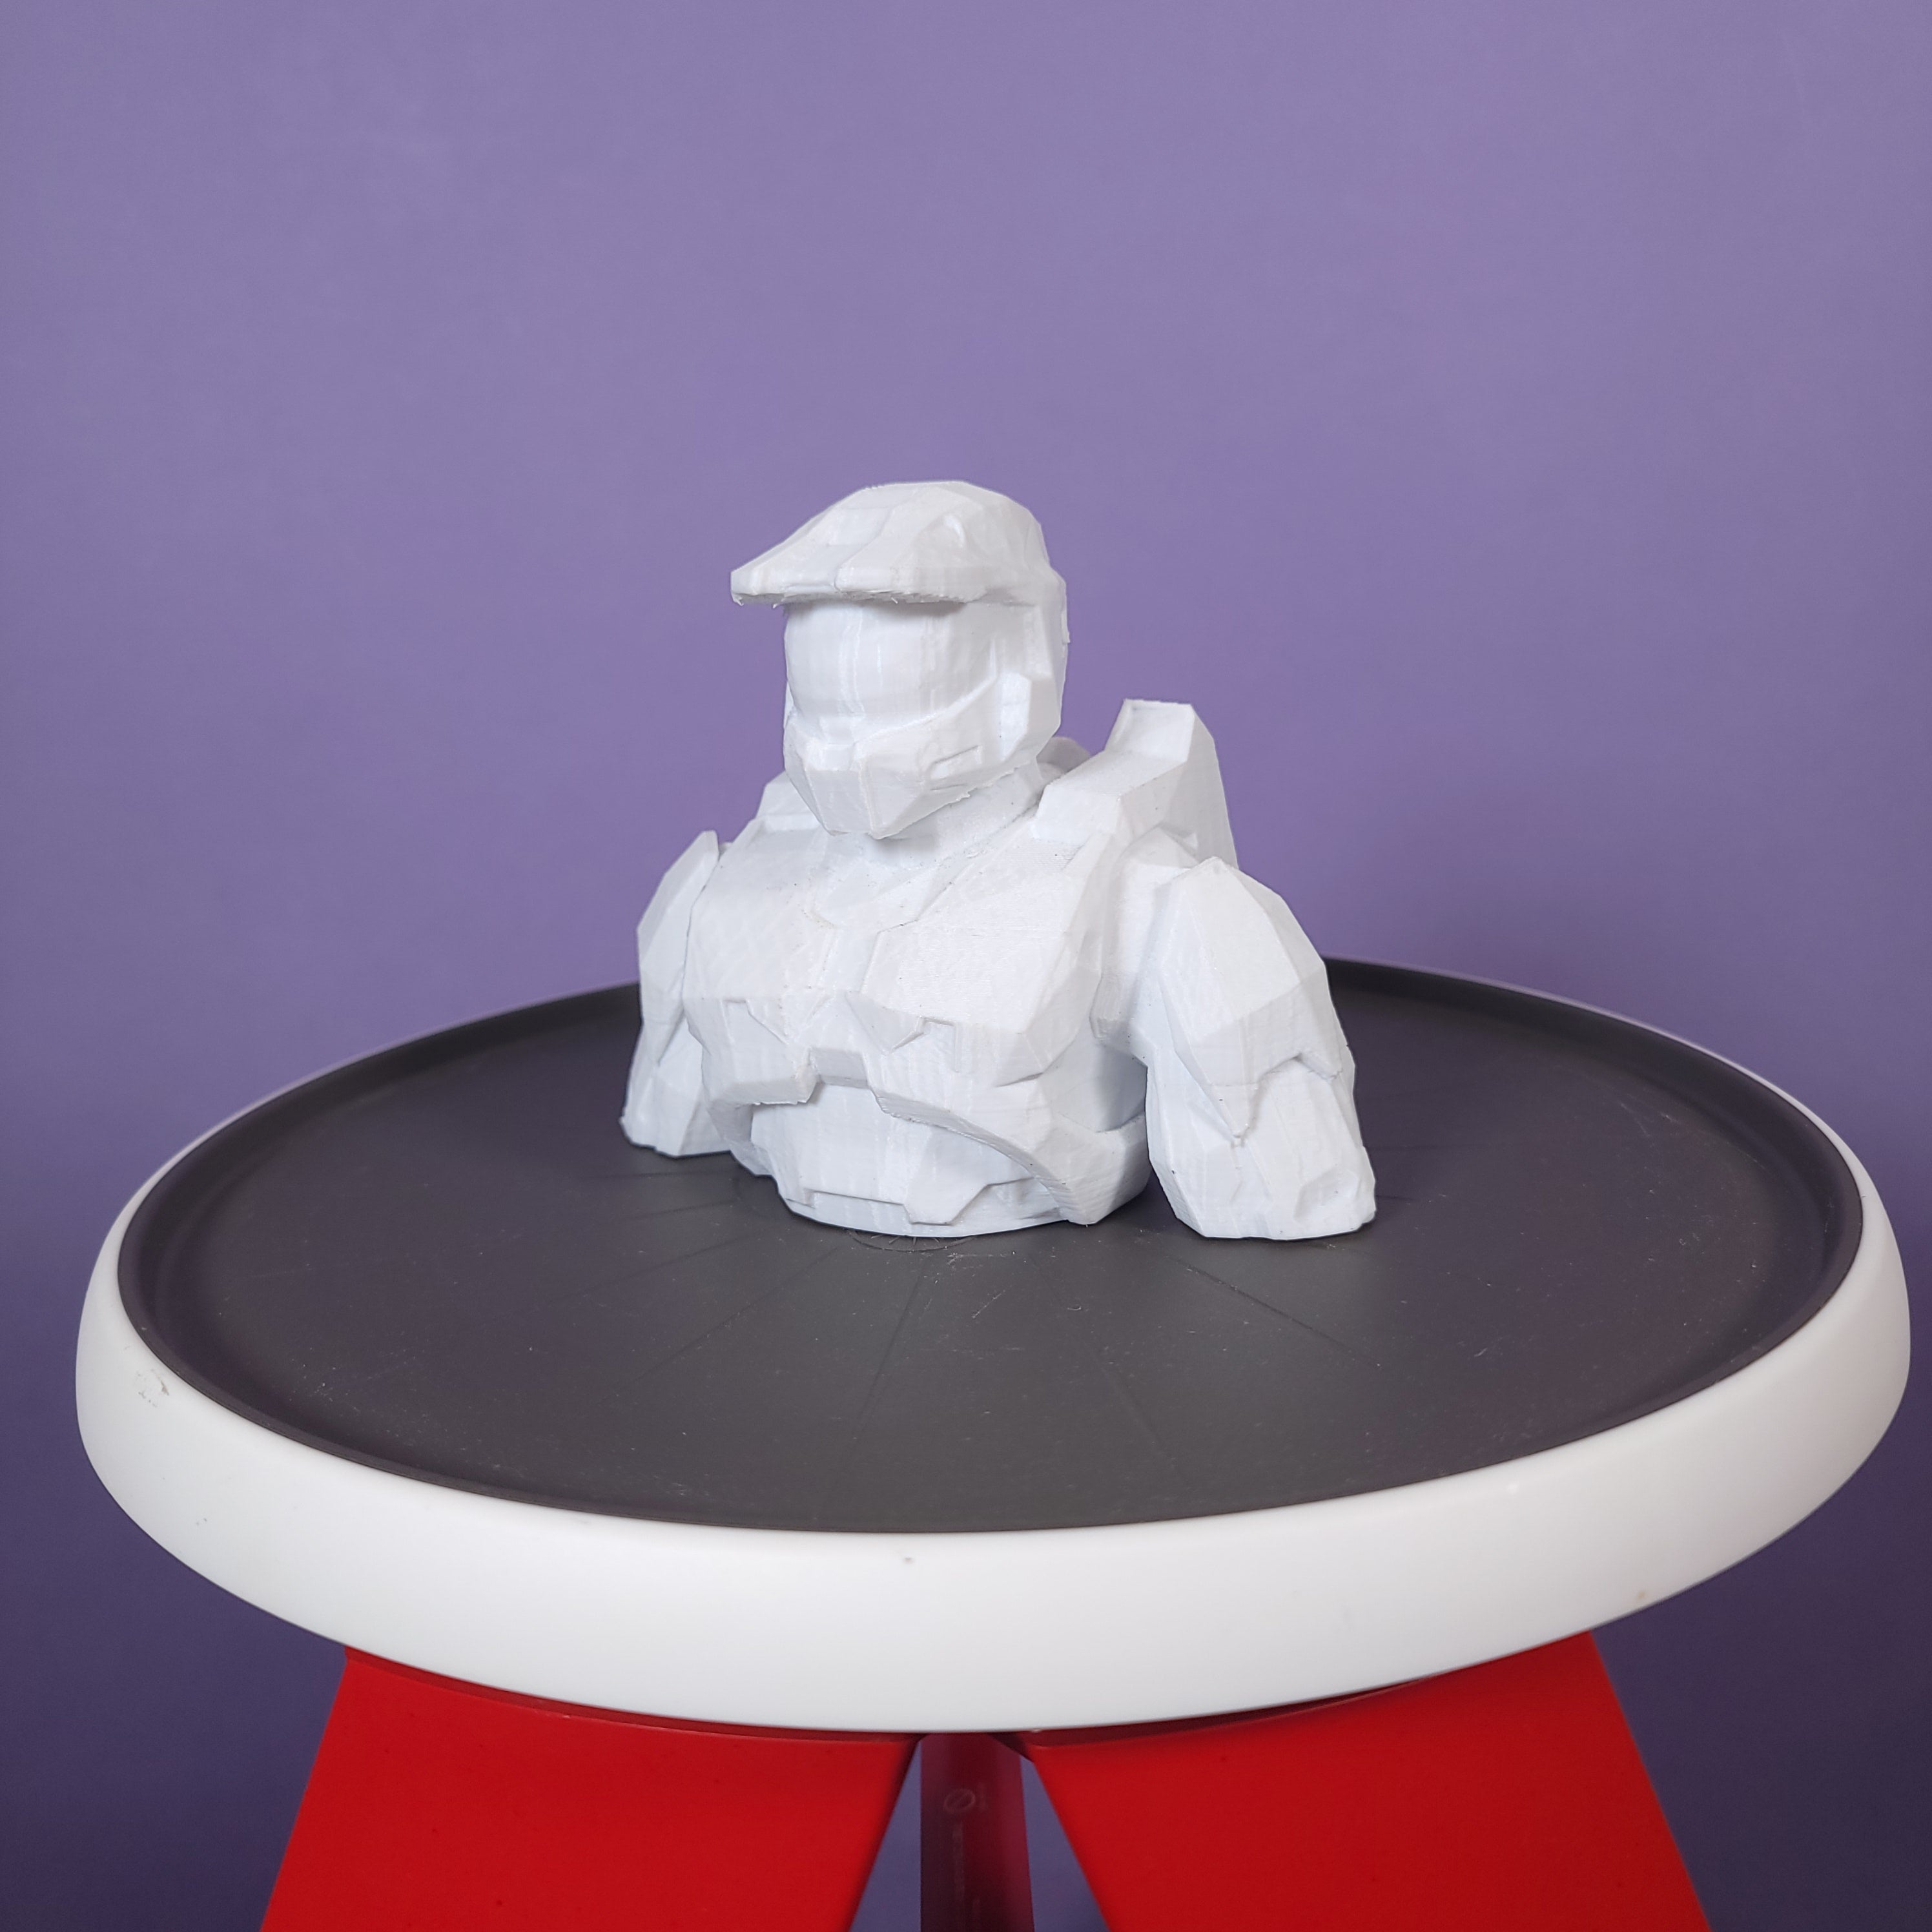 3D Printed Master Chief Table Top Figurine